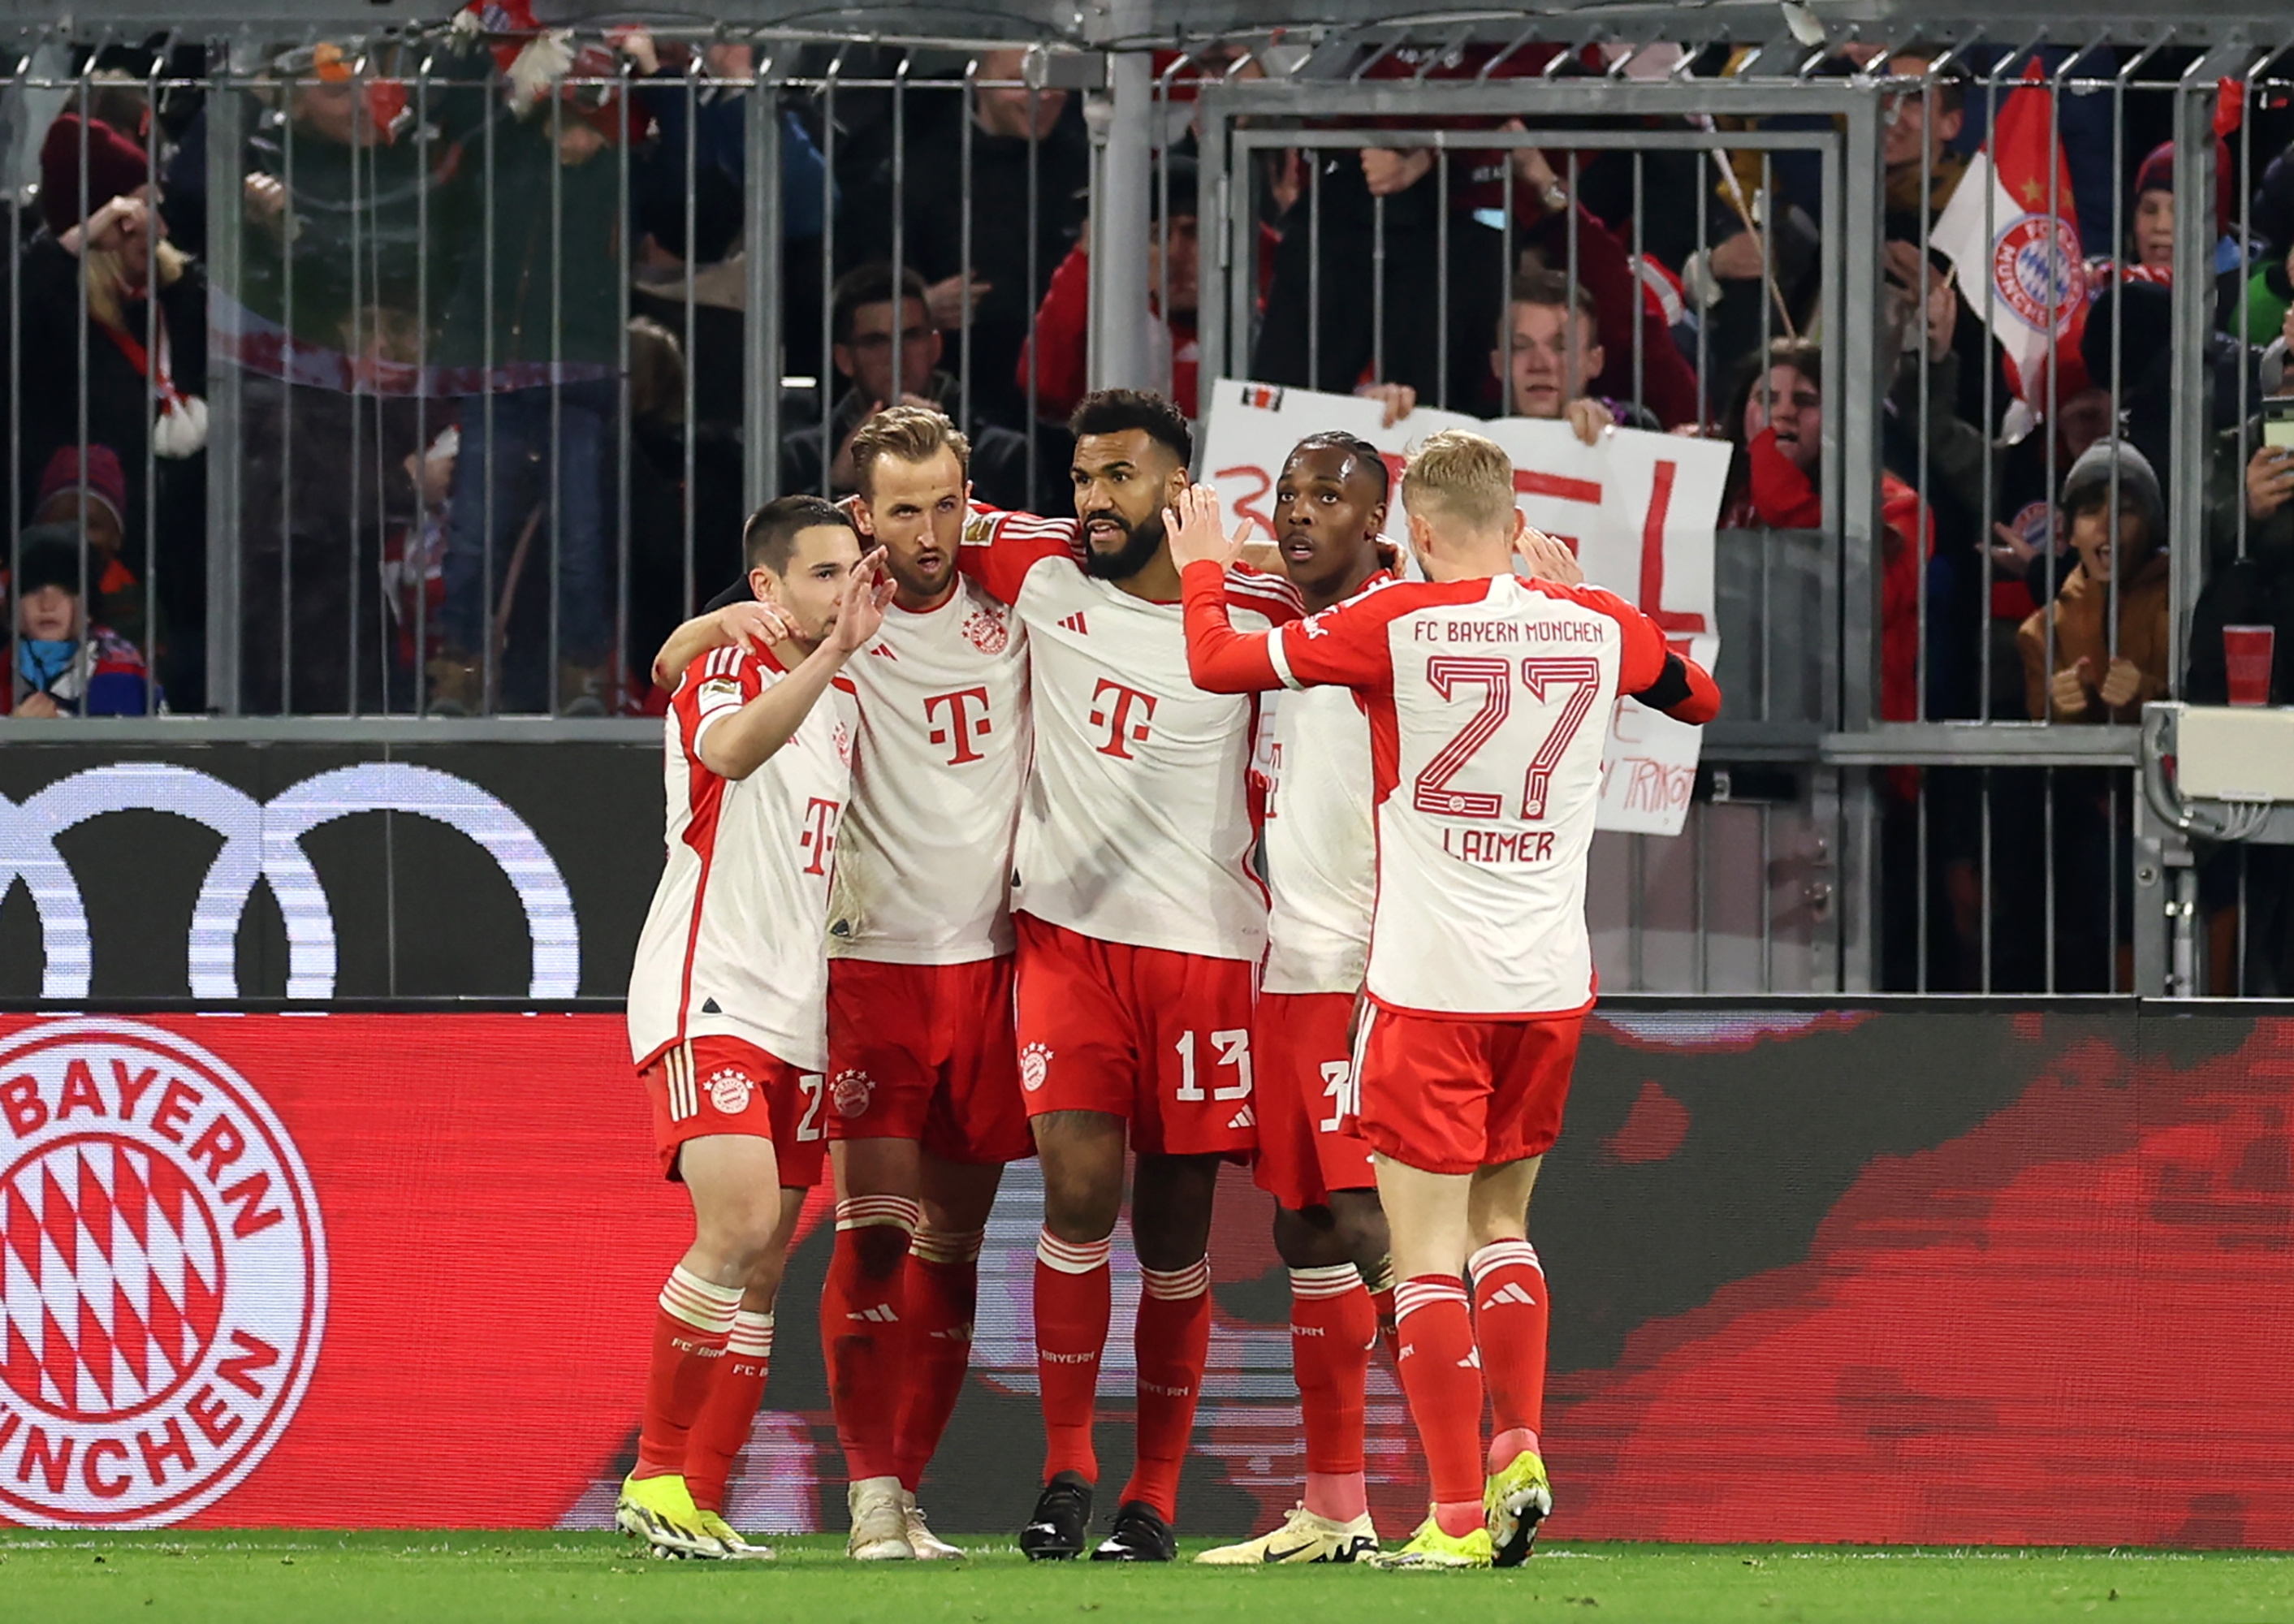 MUNICH, GERMANY - FEBRUARY 24: Harry Kane of Bayern Munich celebrates scoring his team's second goal with teammates during the Bundesliga match between FC Bayern München and RB Leipzig at the Allianz Arena on February 24, 2024 in Munich, Germany. (Photo by Boris Streubel/Getty Images)